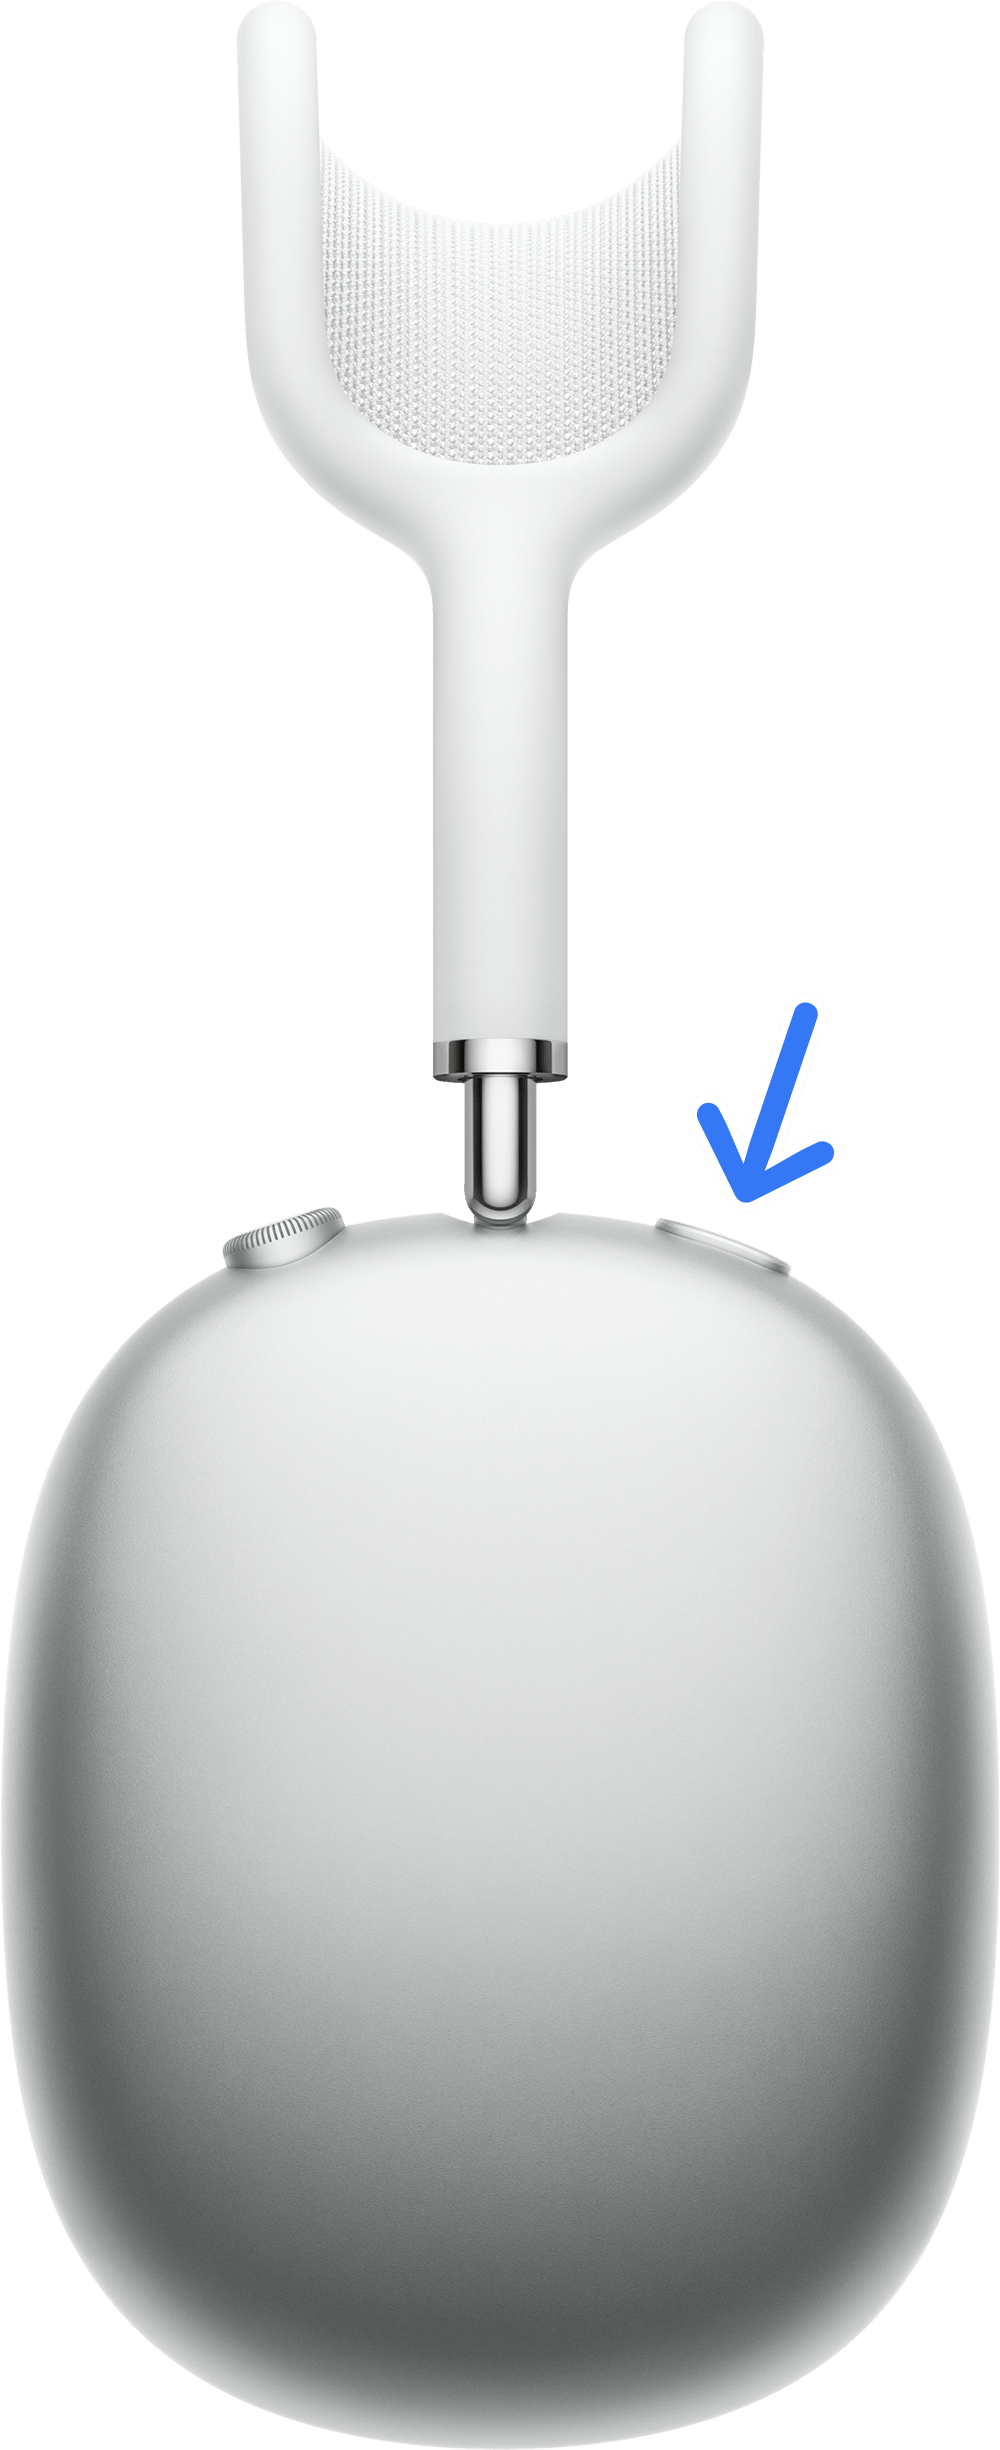 noise control button on AirPods Max